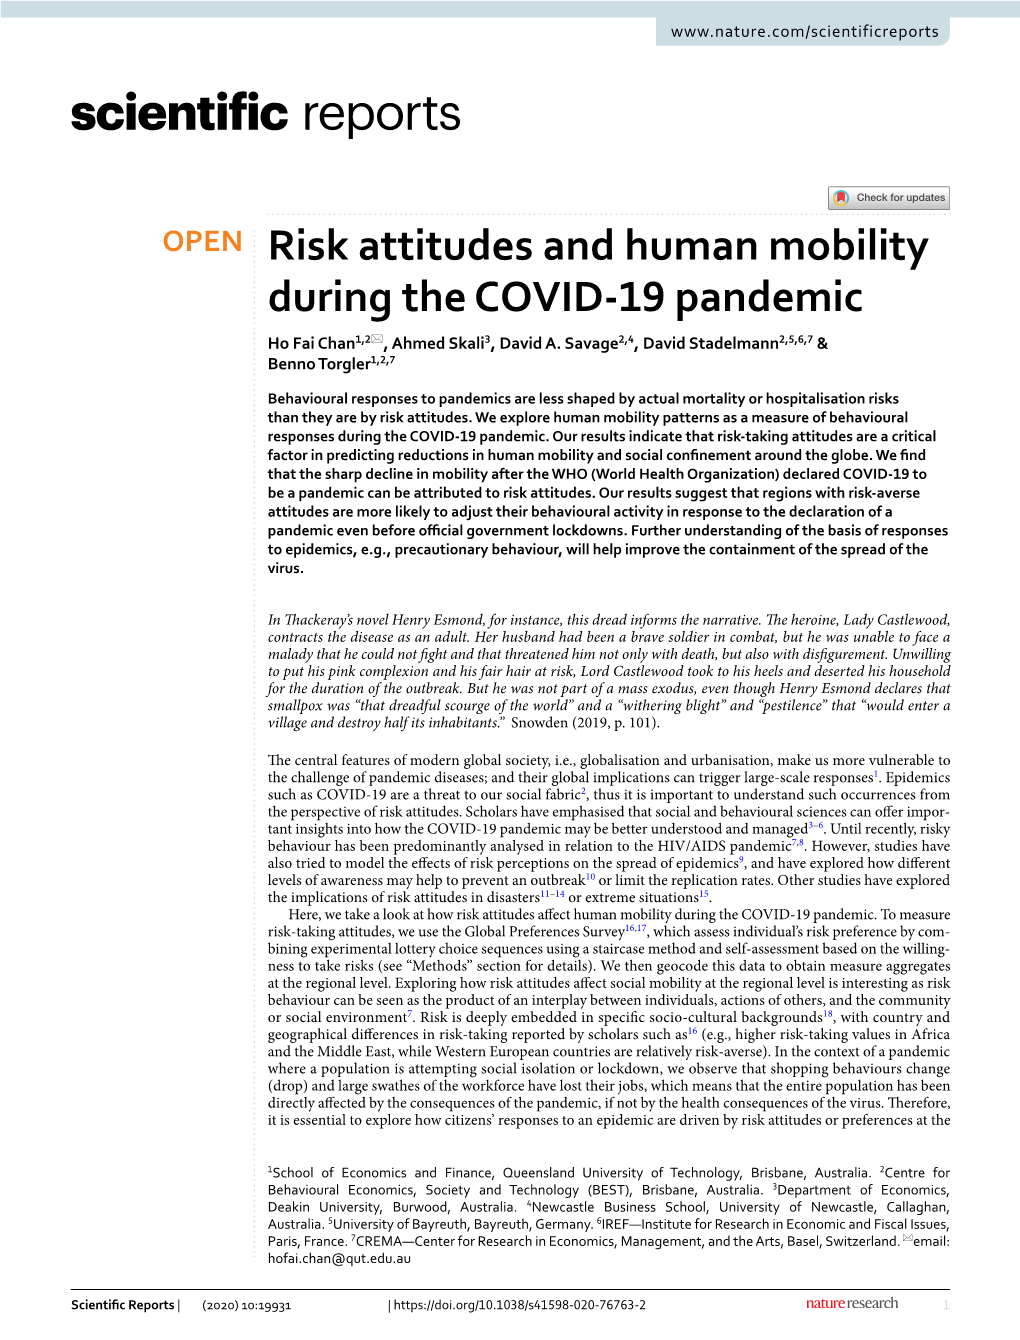 Risk Attitudes and Human Mobility During the COVID-19 Pandemic